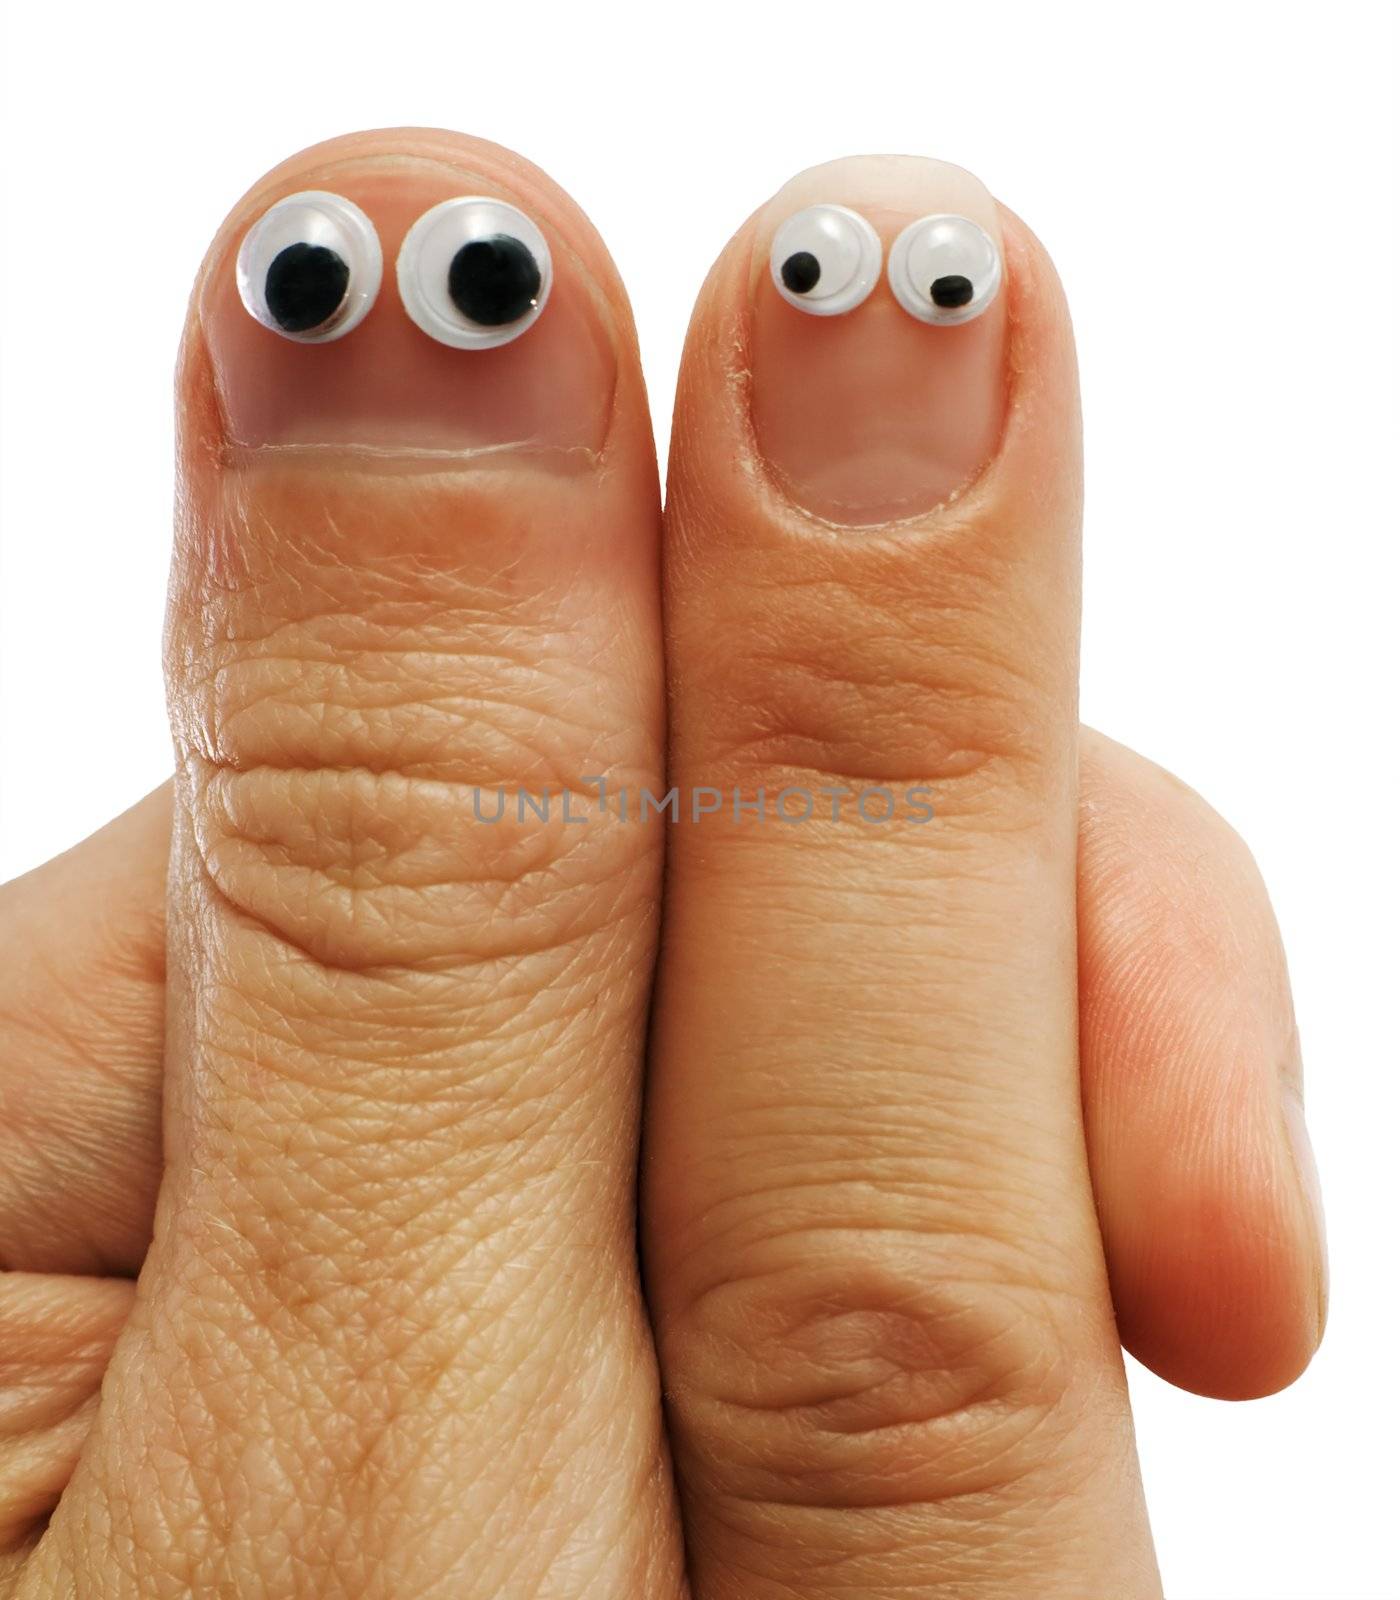 Two fingers of hands with doll eyes